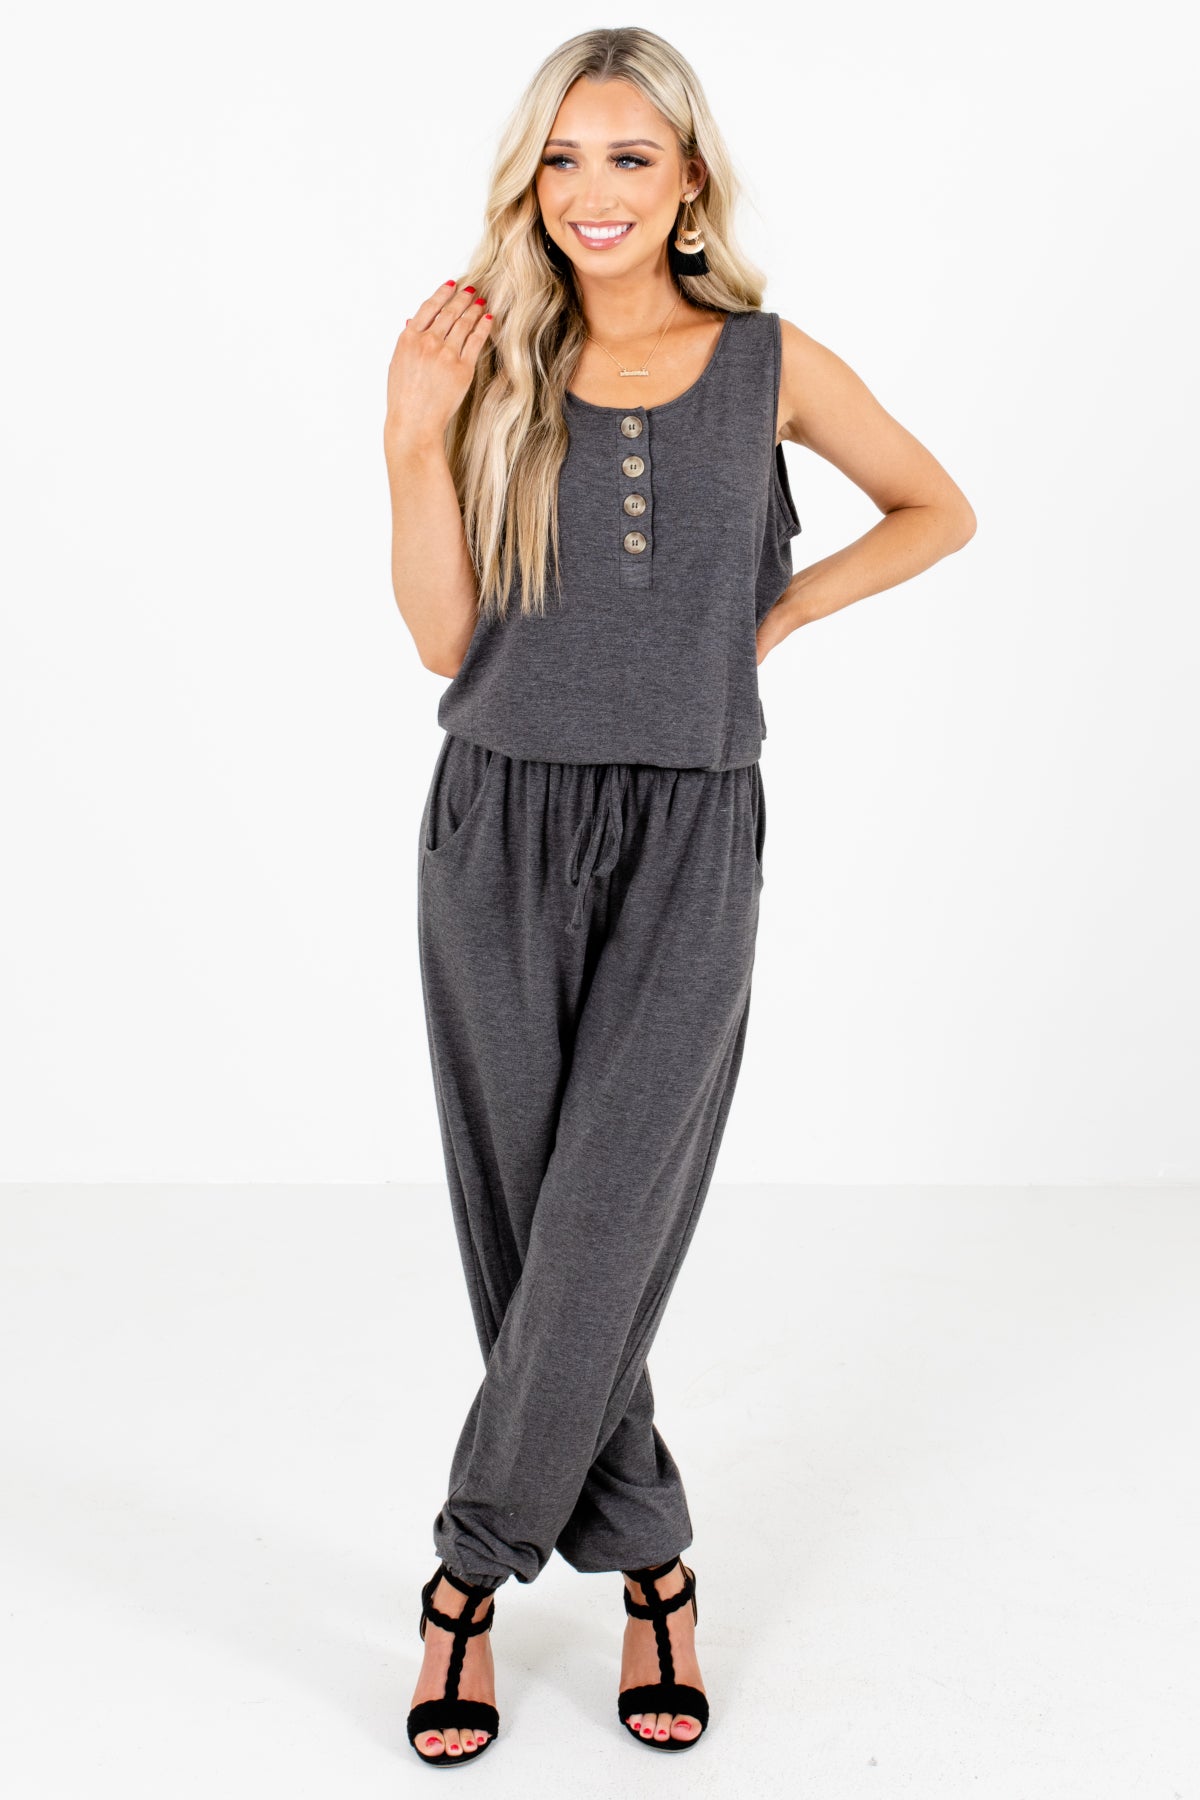 Gray Cute and Comfortable Boutique Jumpsuits for Women